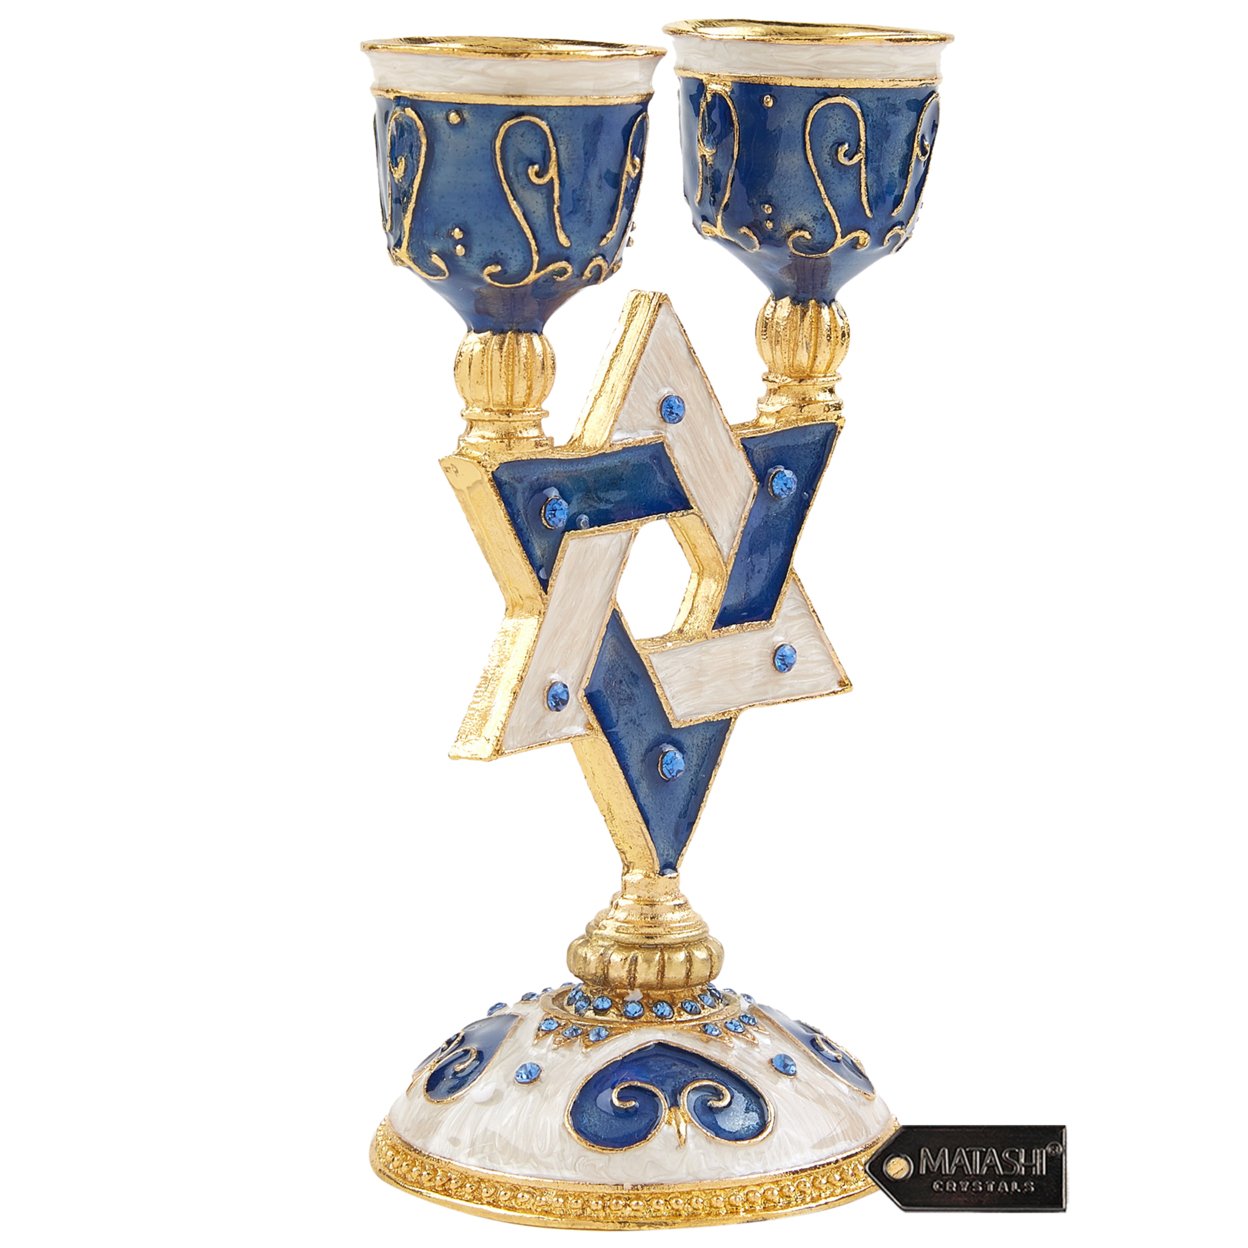 Matashi Oil Candle Holders Displays 2 Candles, Blue Intricate Details With Crystals Star Of David, Modern Home Decor Jewish Holiday Decor